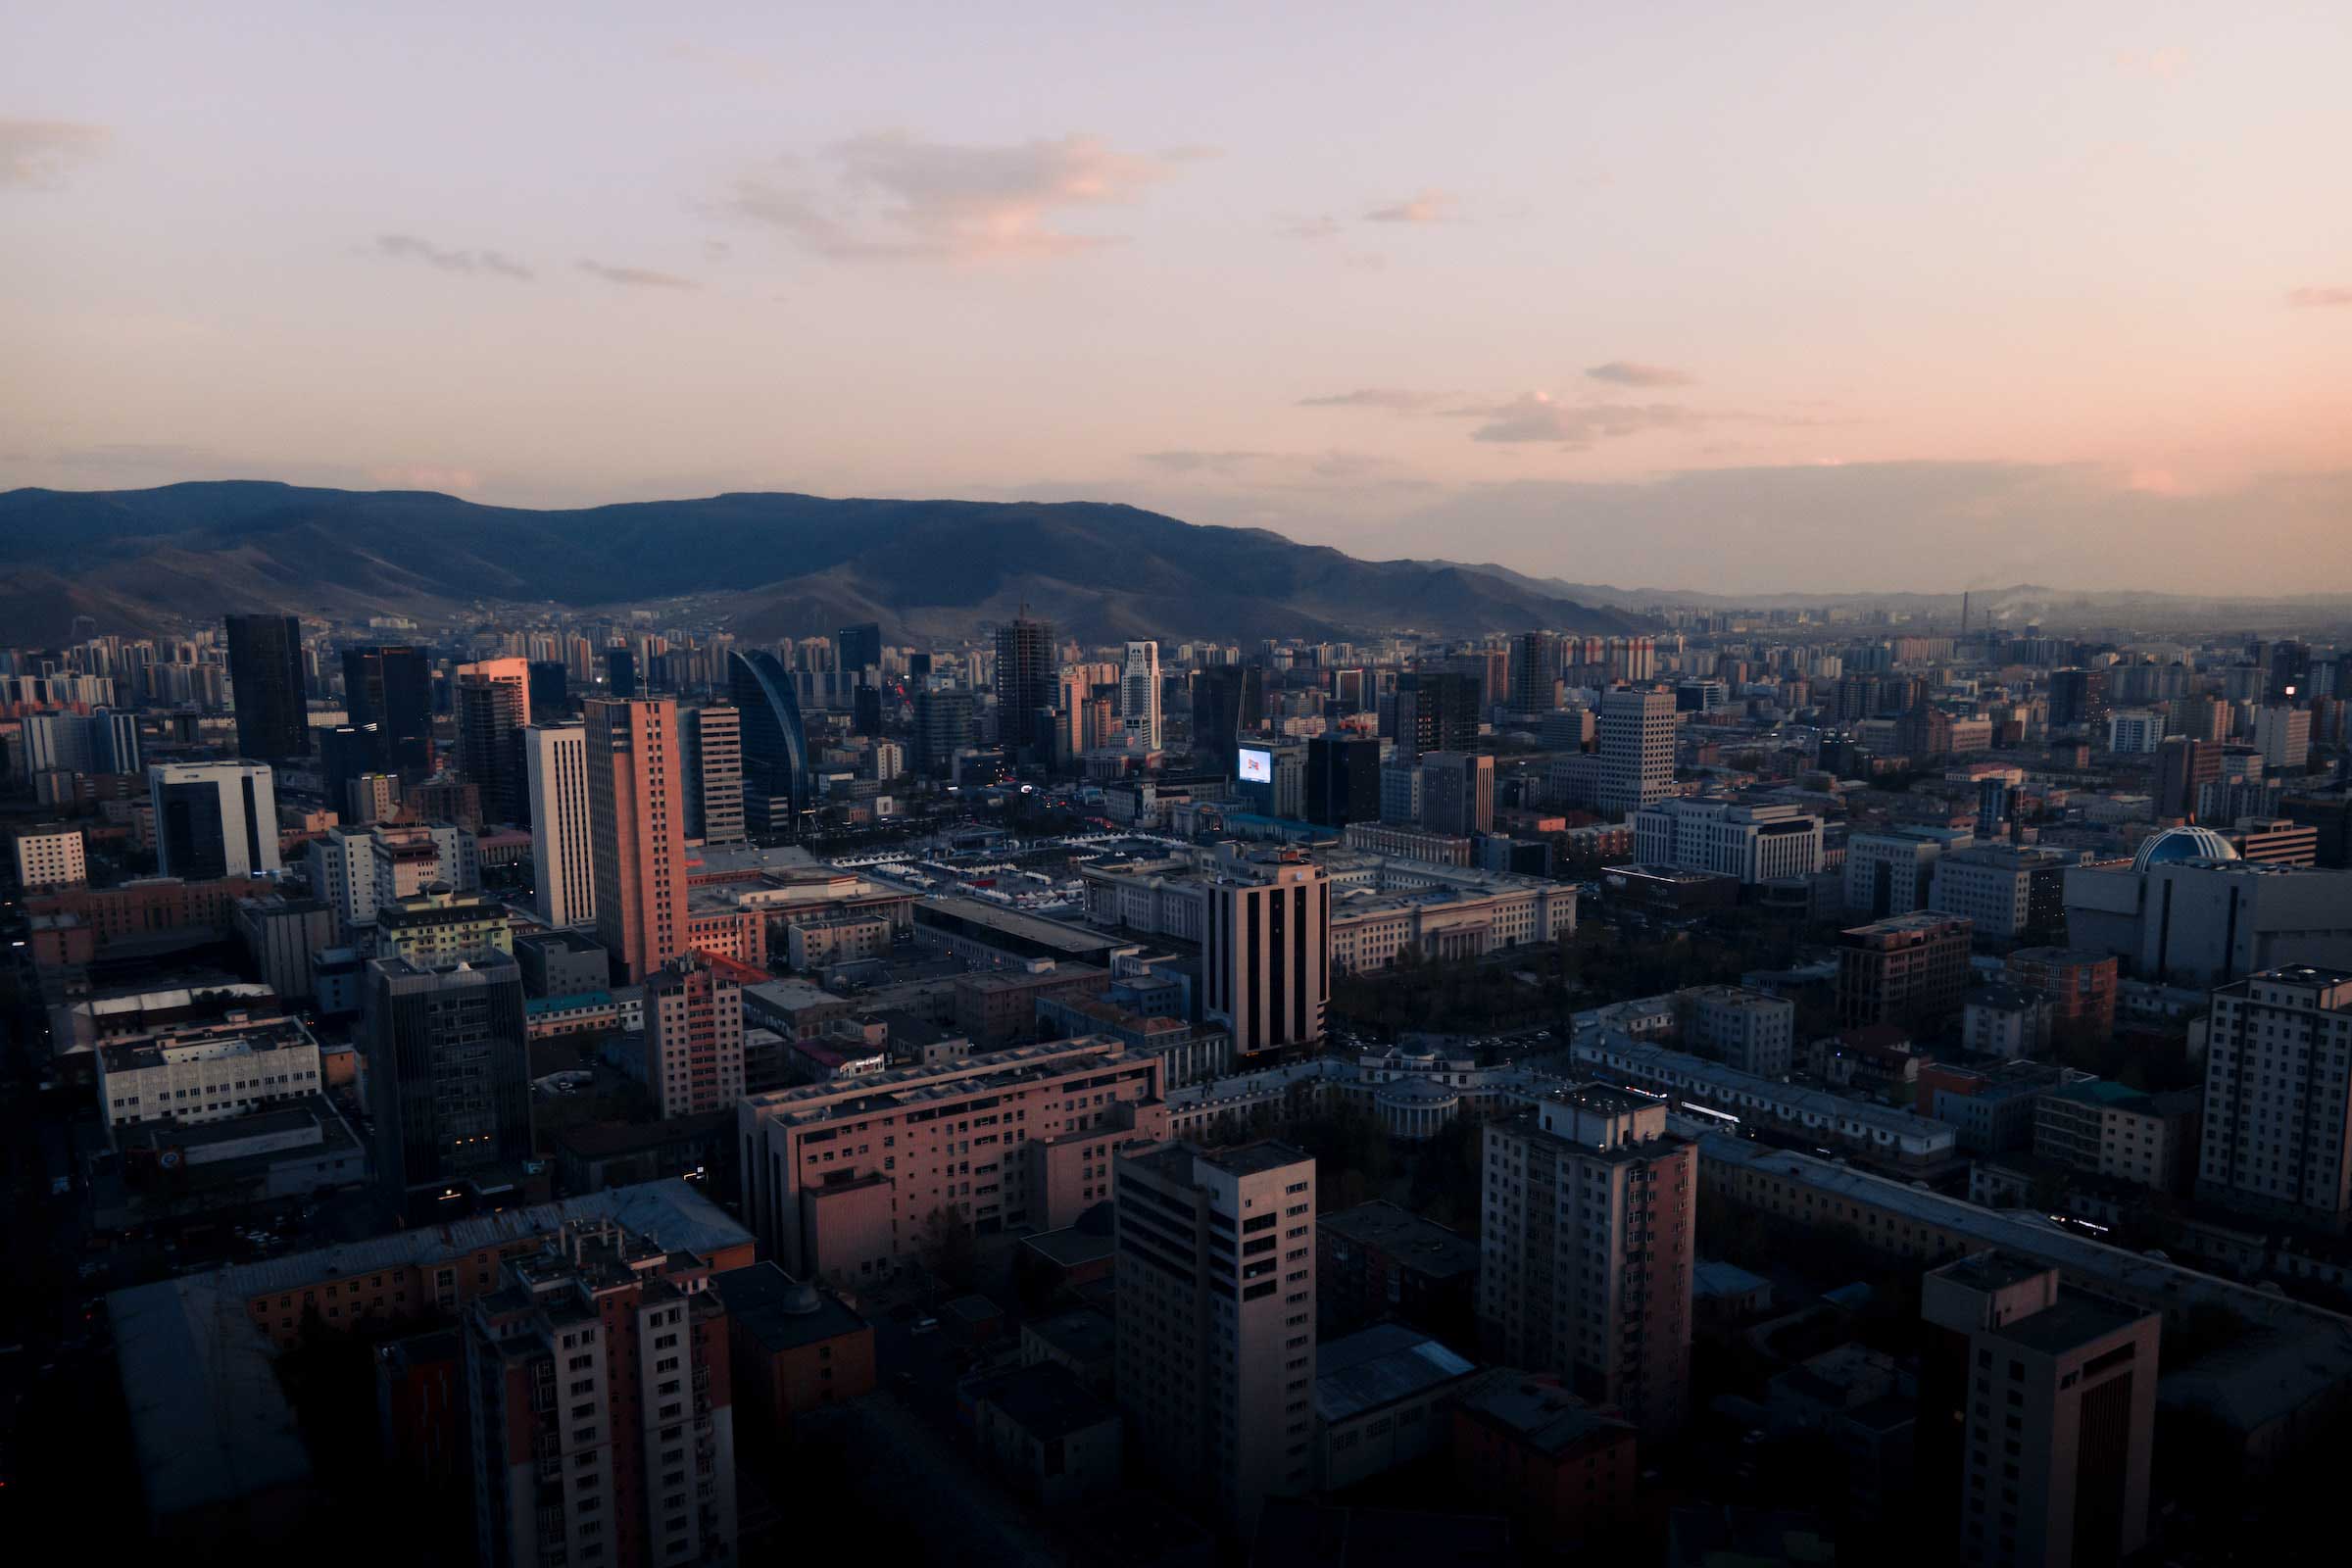 10 Interesting facts about Ulaanbaatar – Mongolia’s capital city!